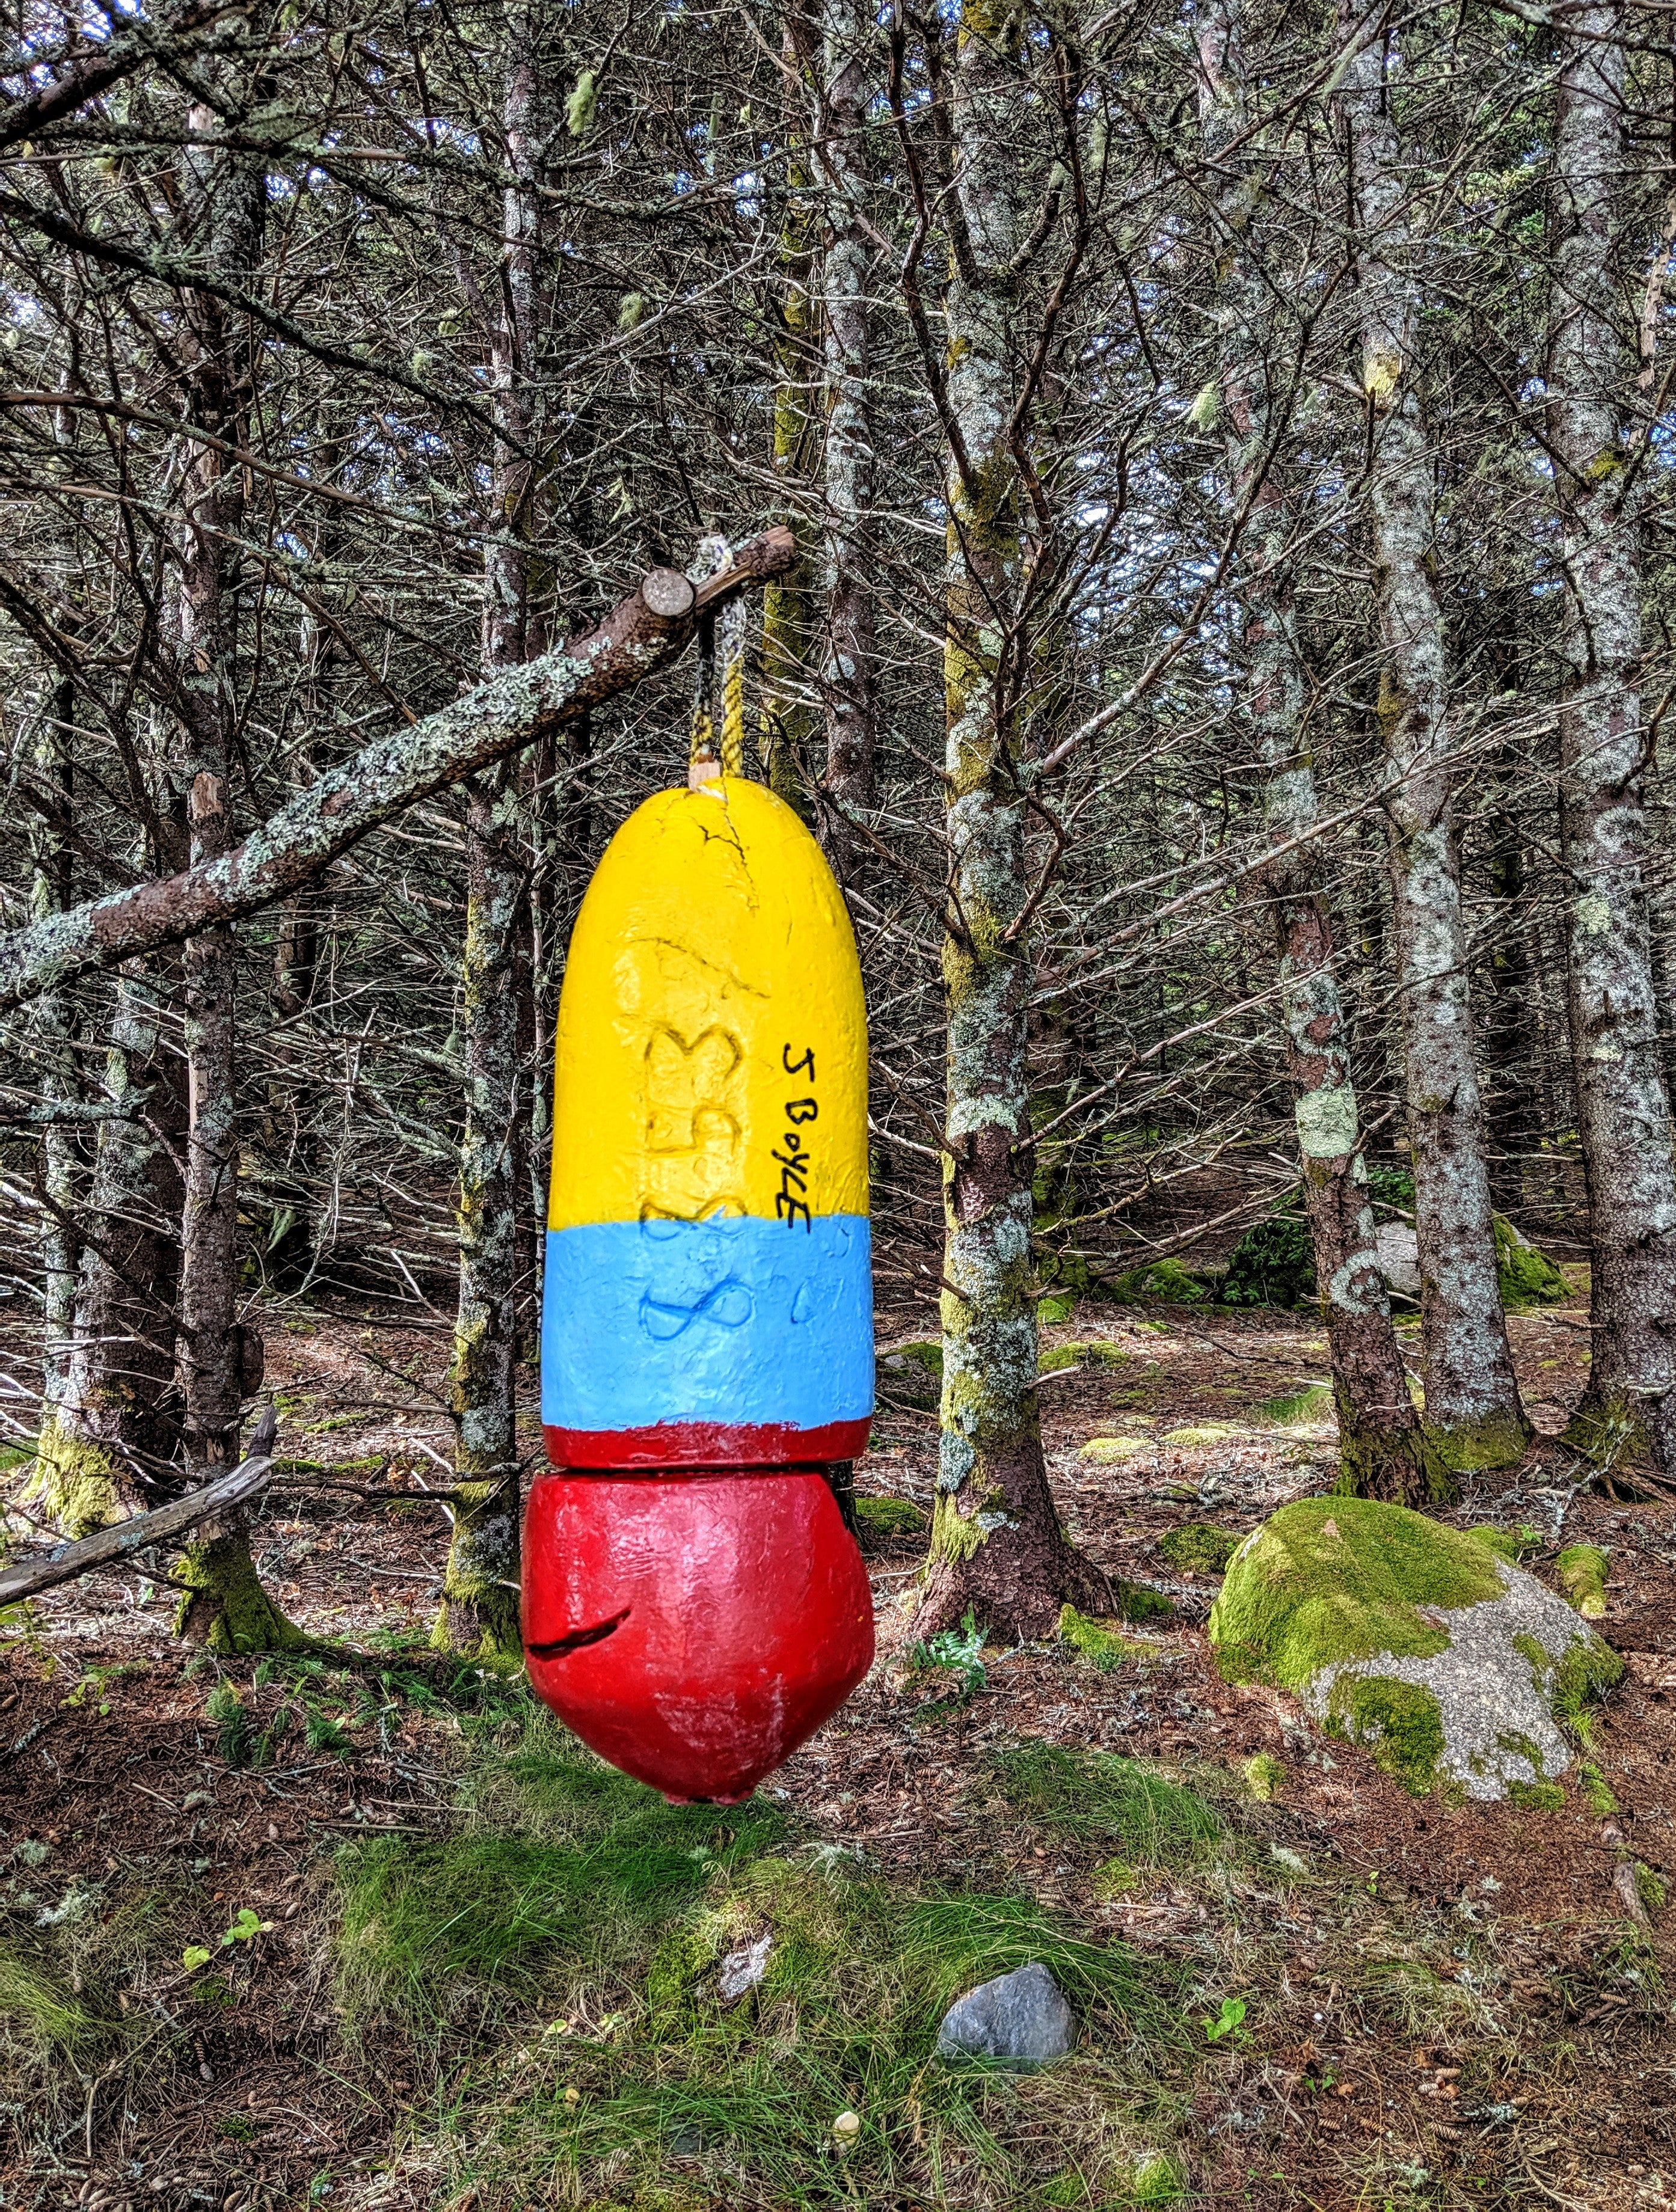 Look for the buoy to guide you to the campsites from the beach.